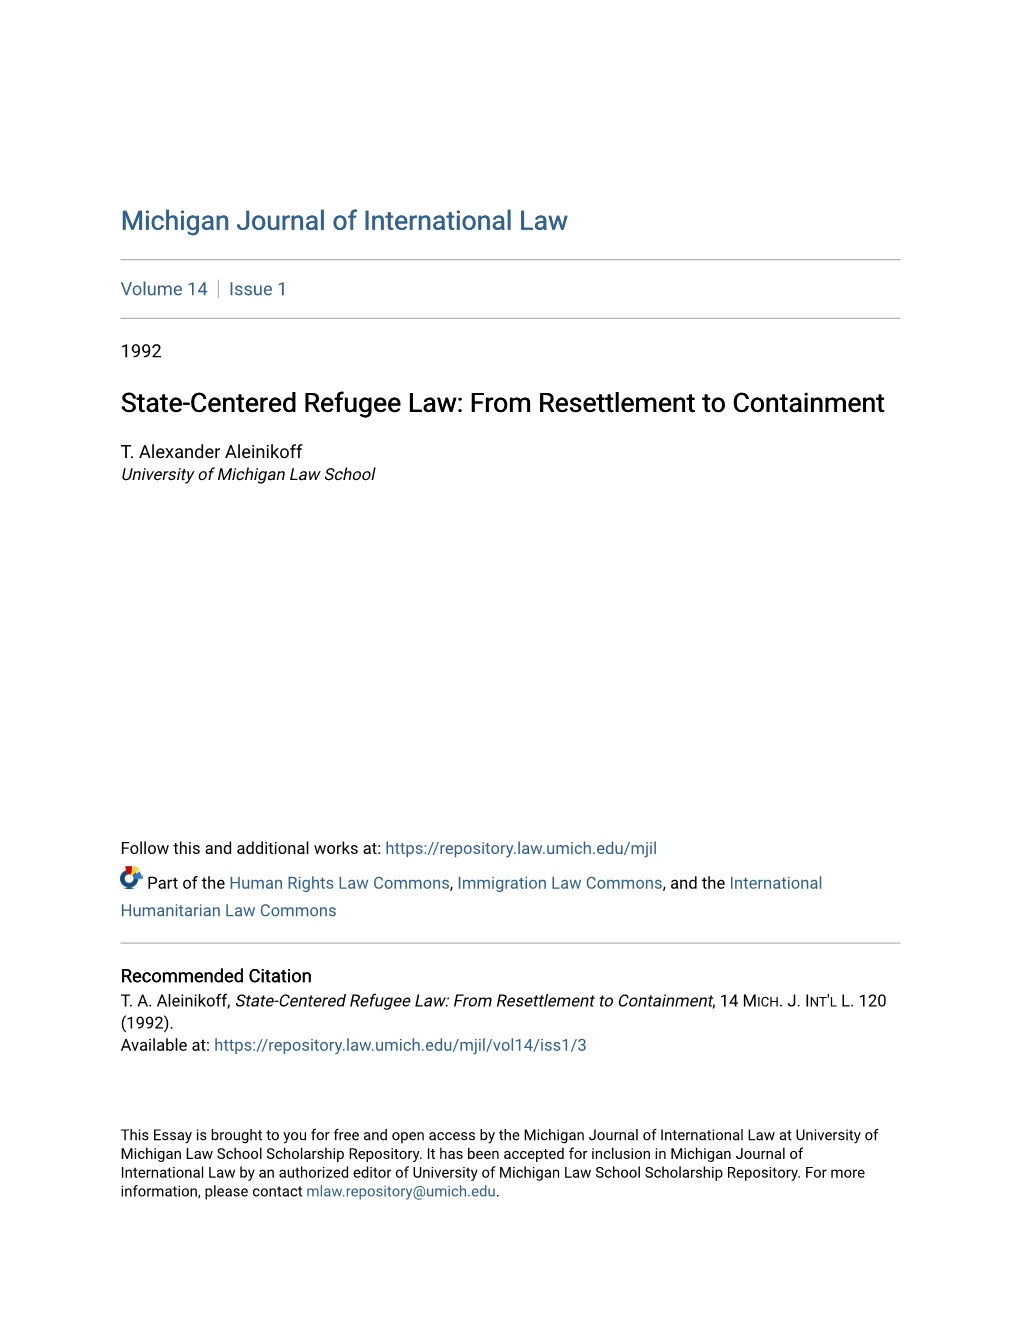 State-Centered Refugee Law: from Resettlement to Containment